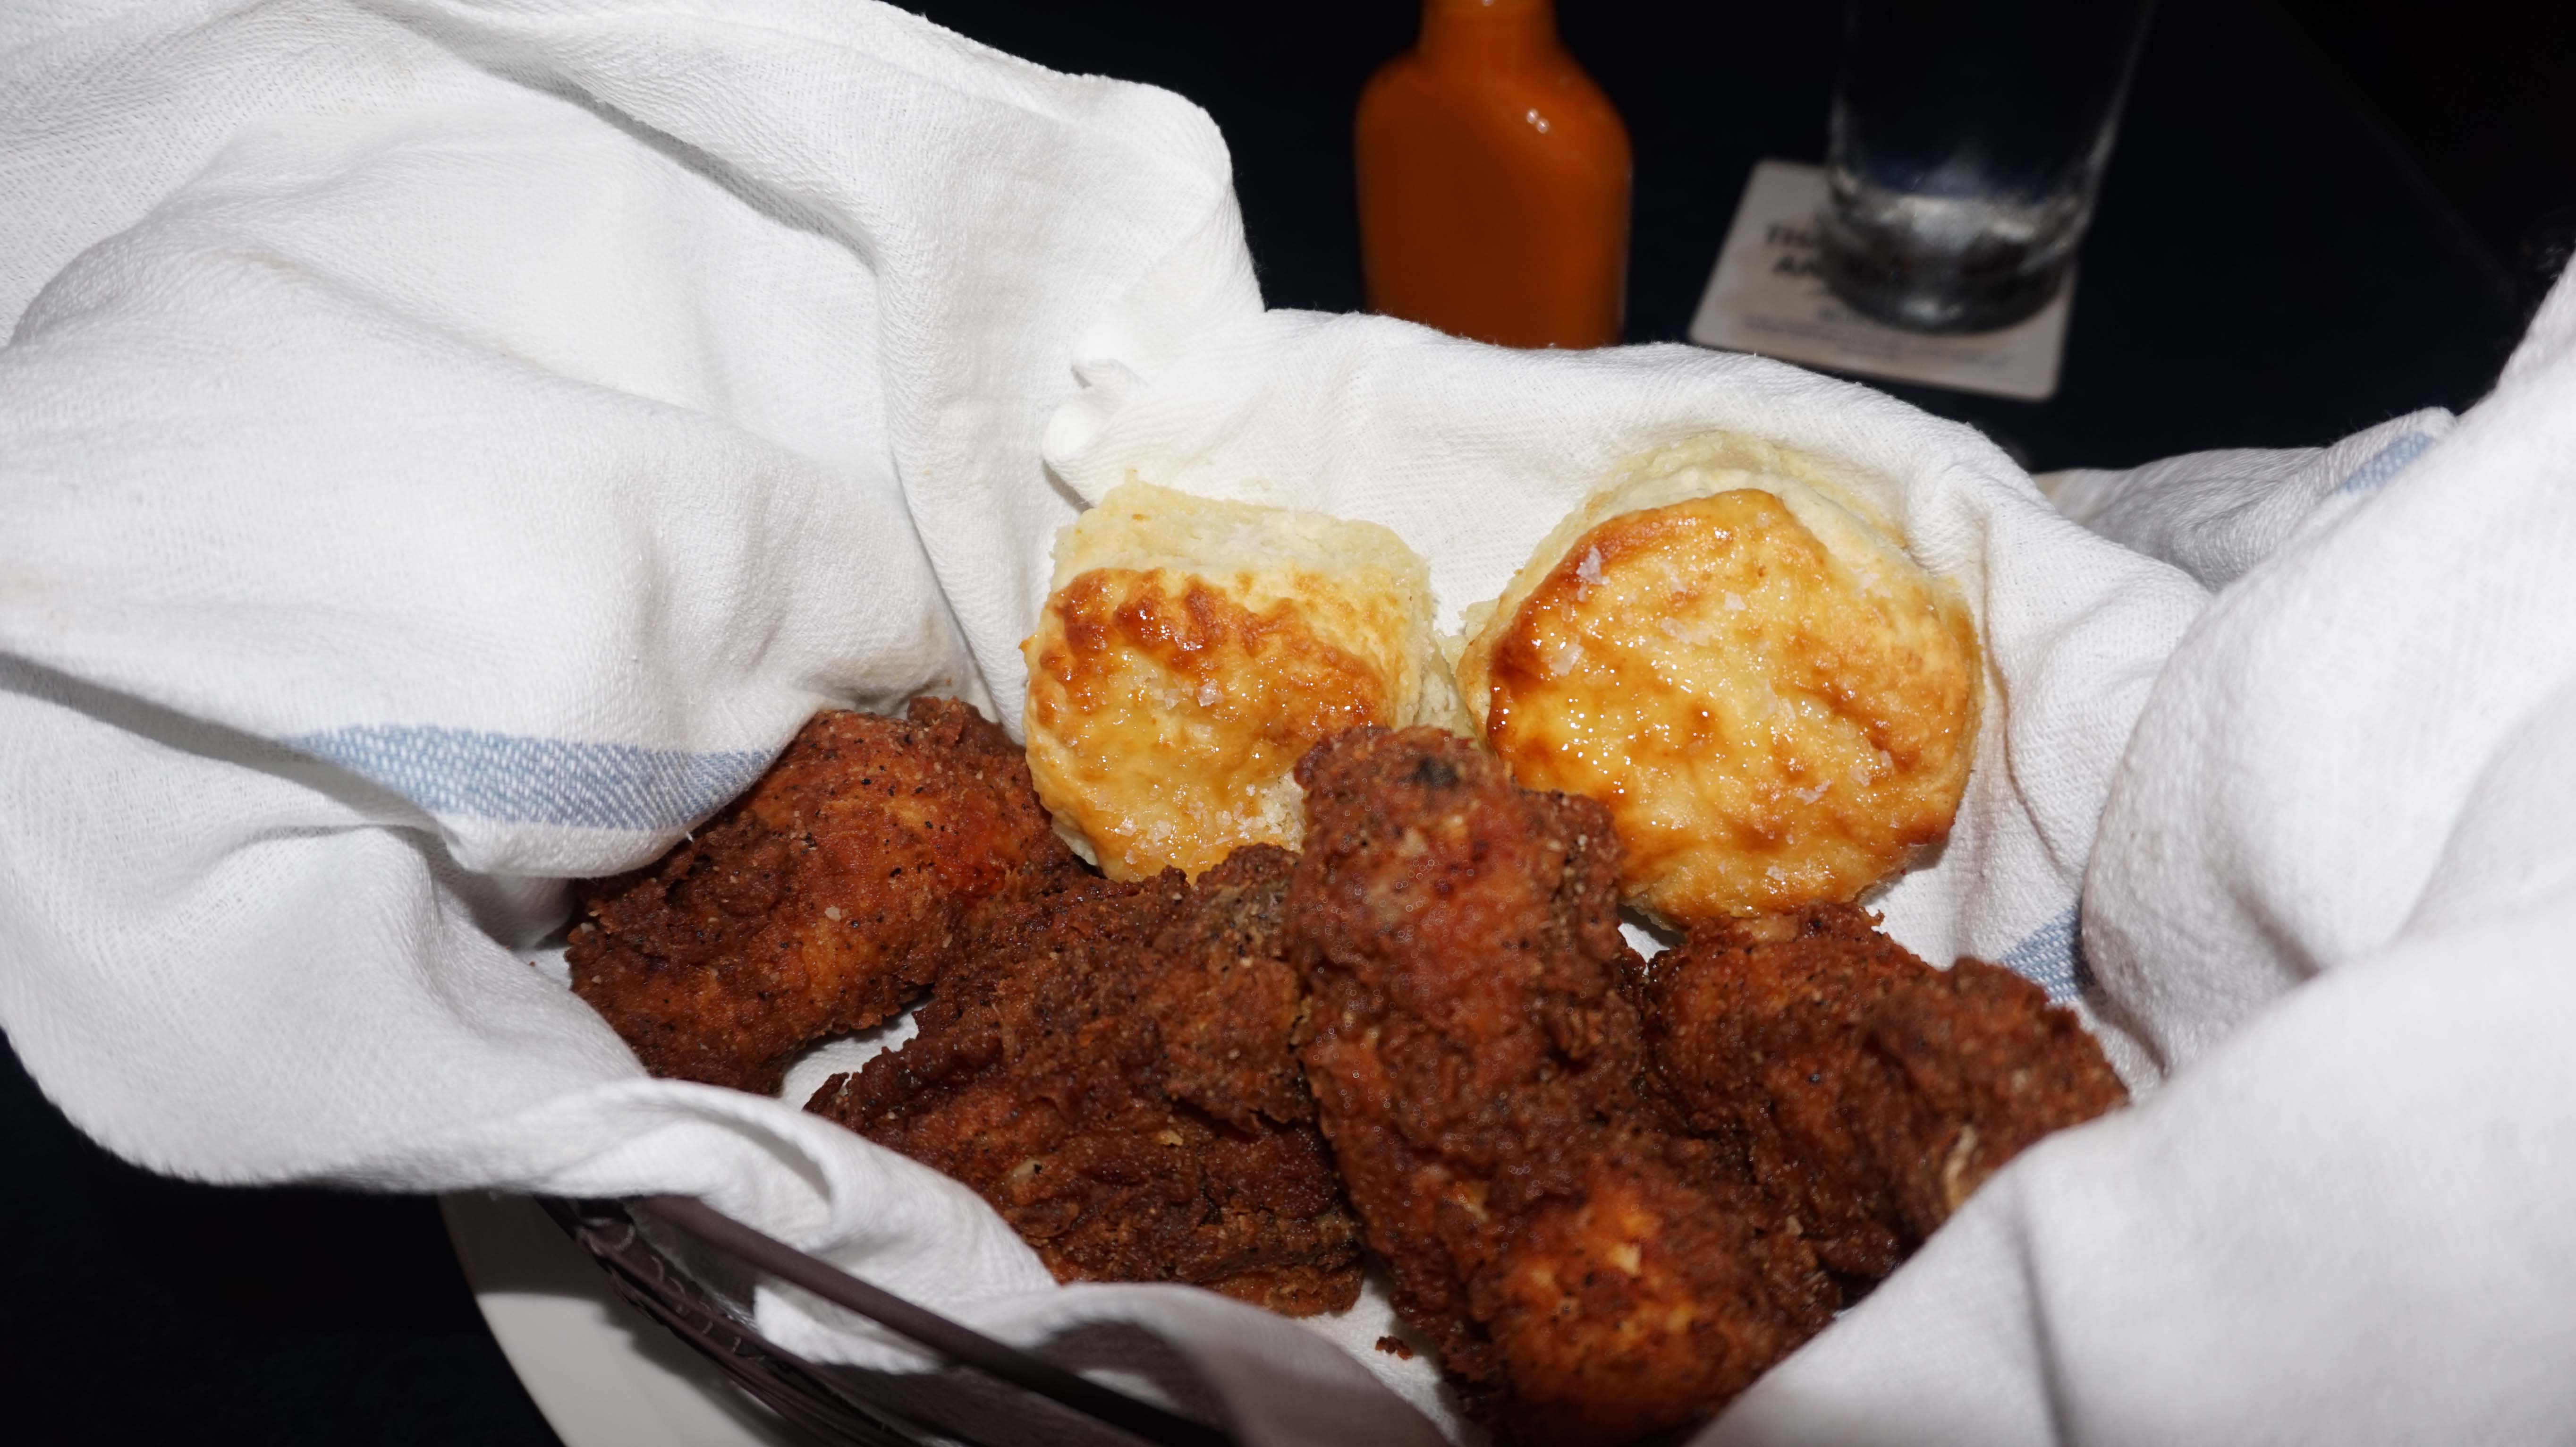 Blue Smoke fried chicken basket and biscuits